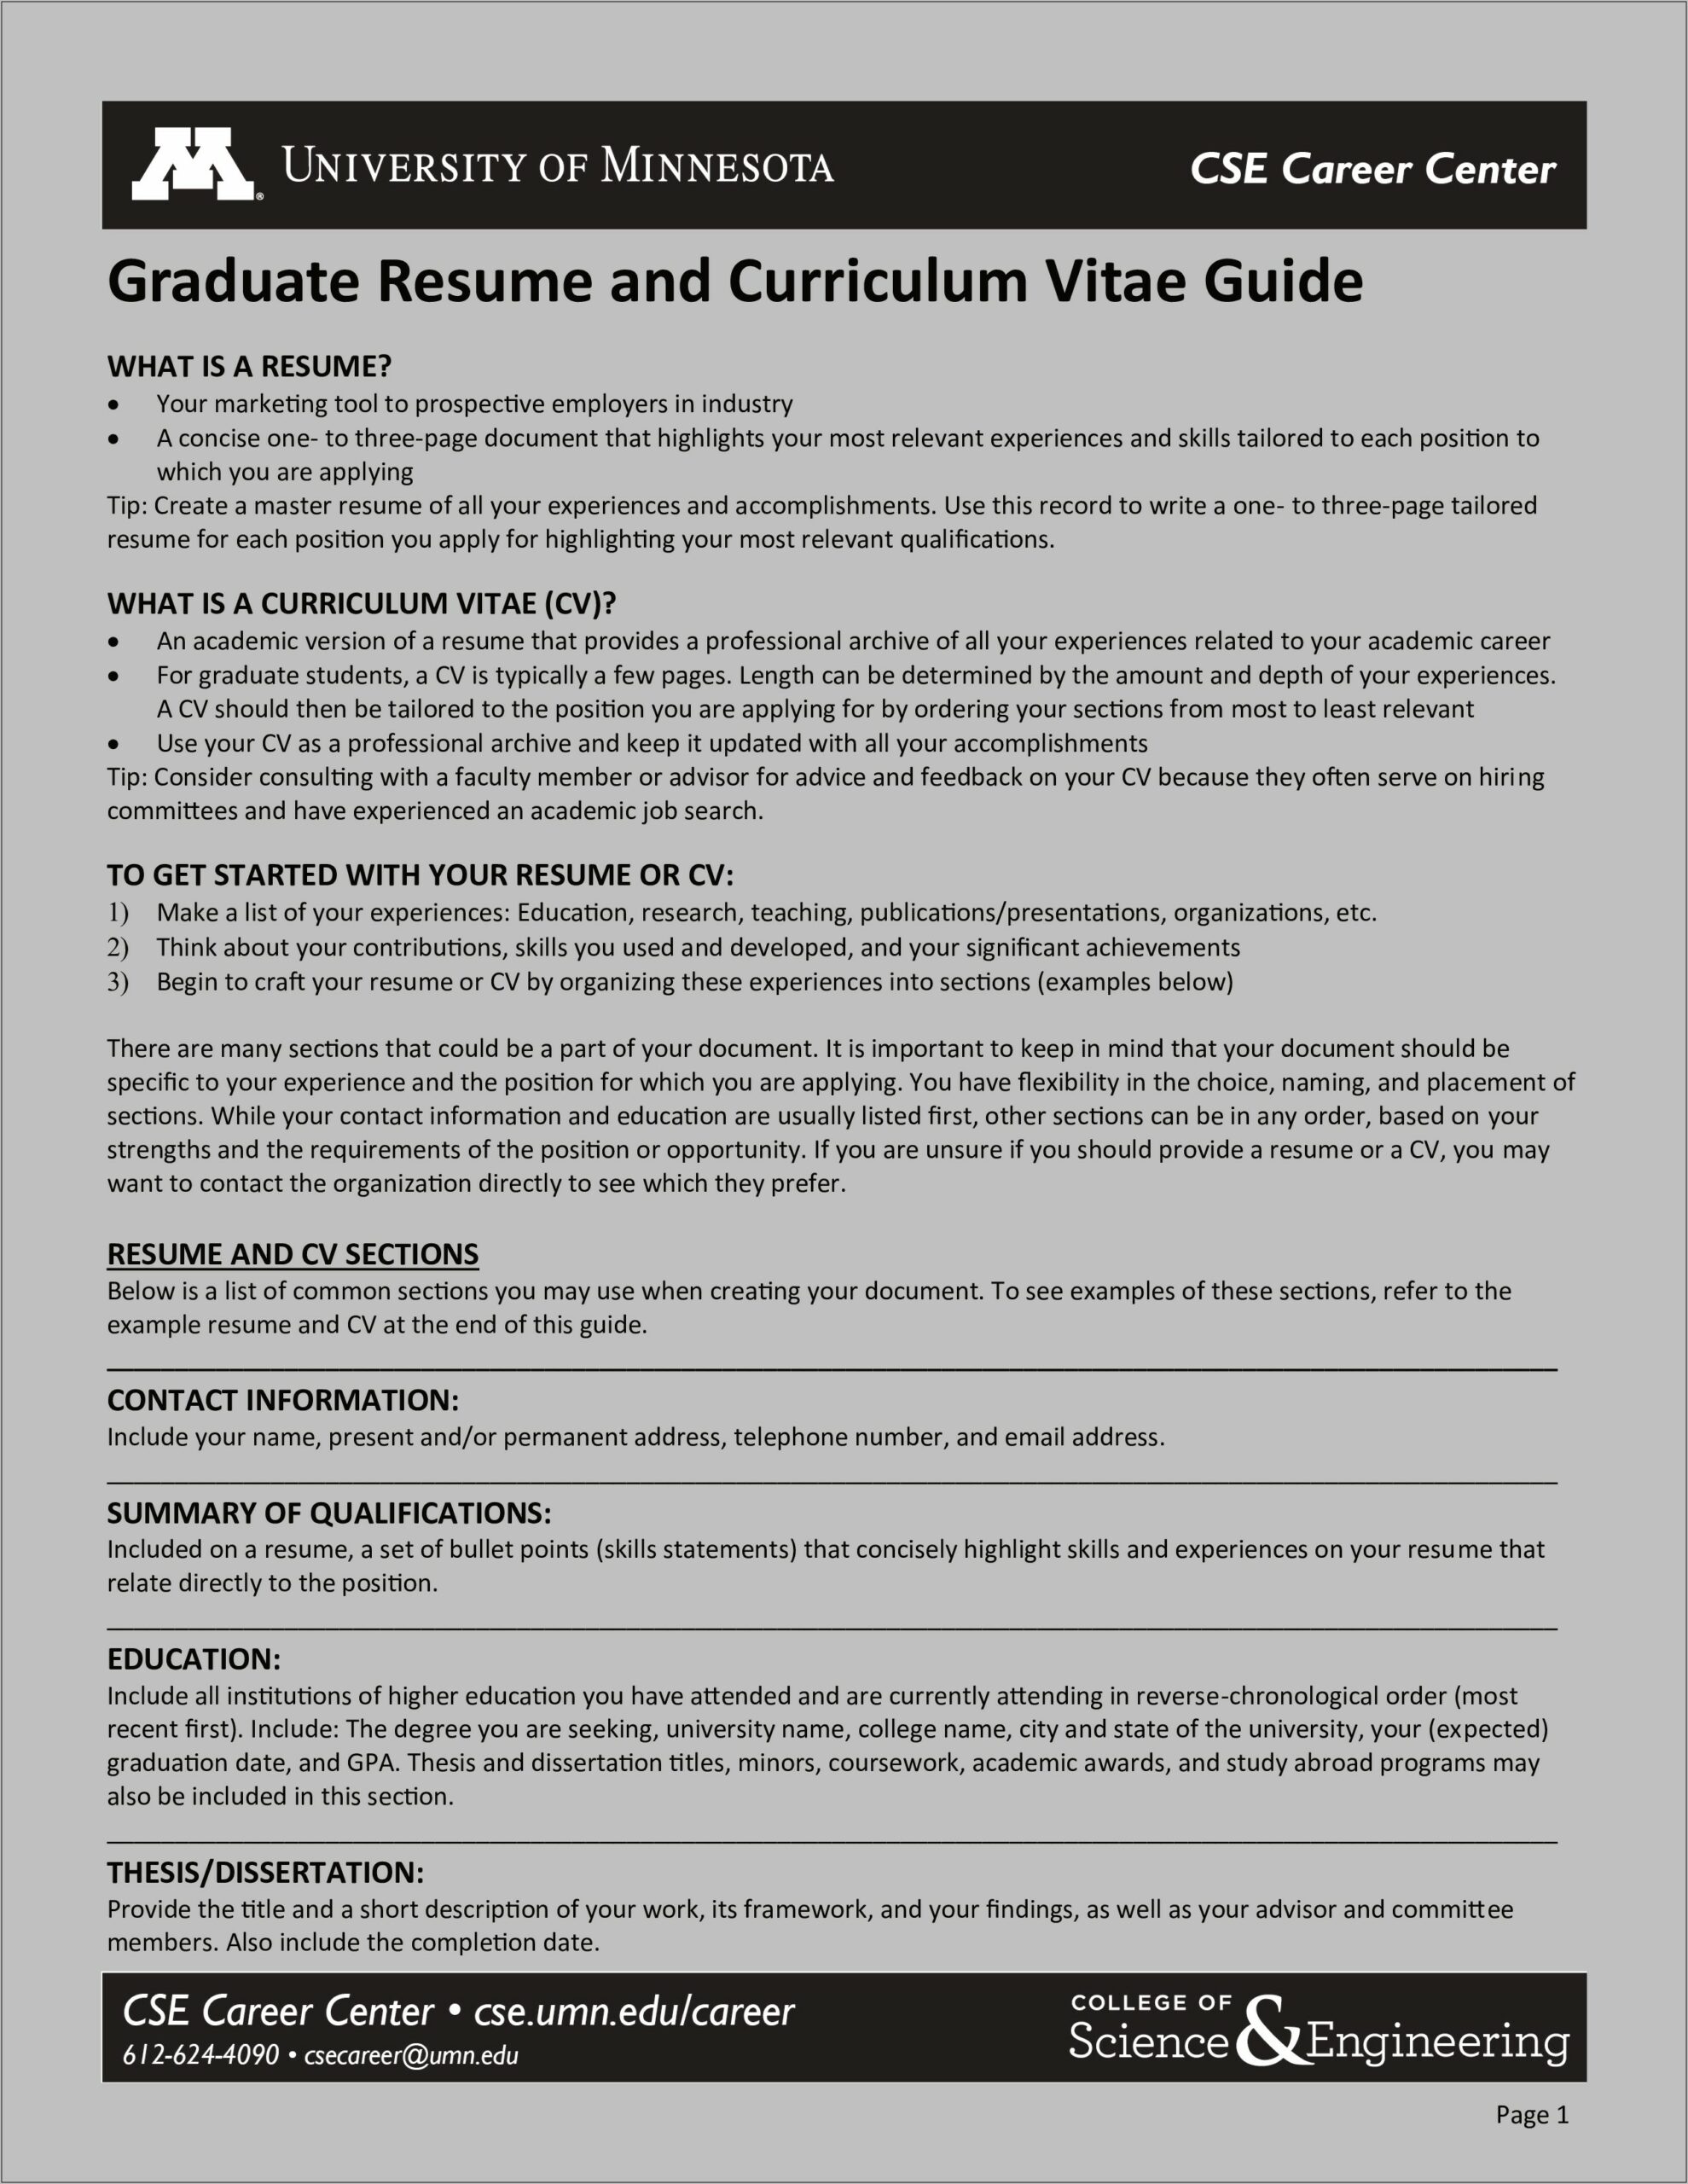 Sample Resume Expected Graduation Date Format